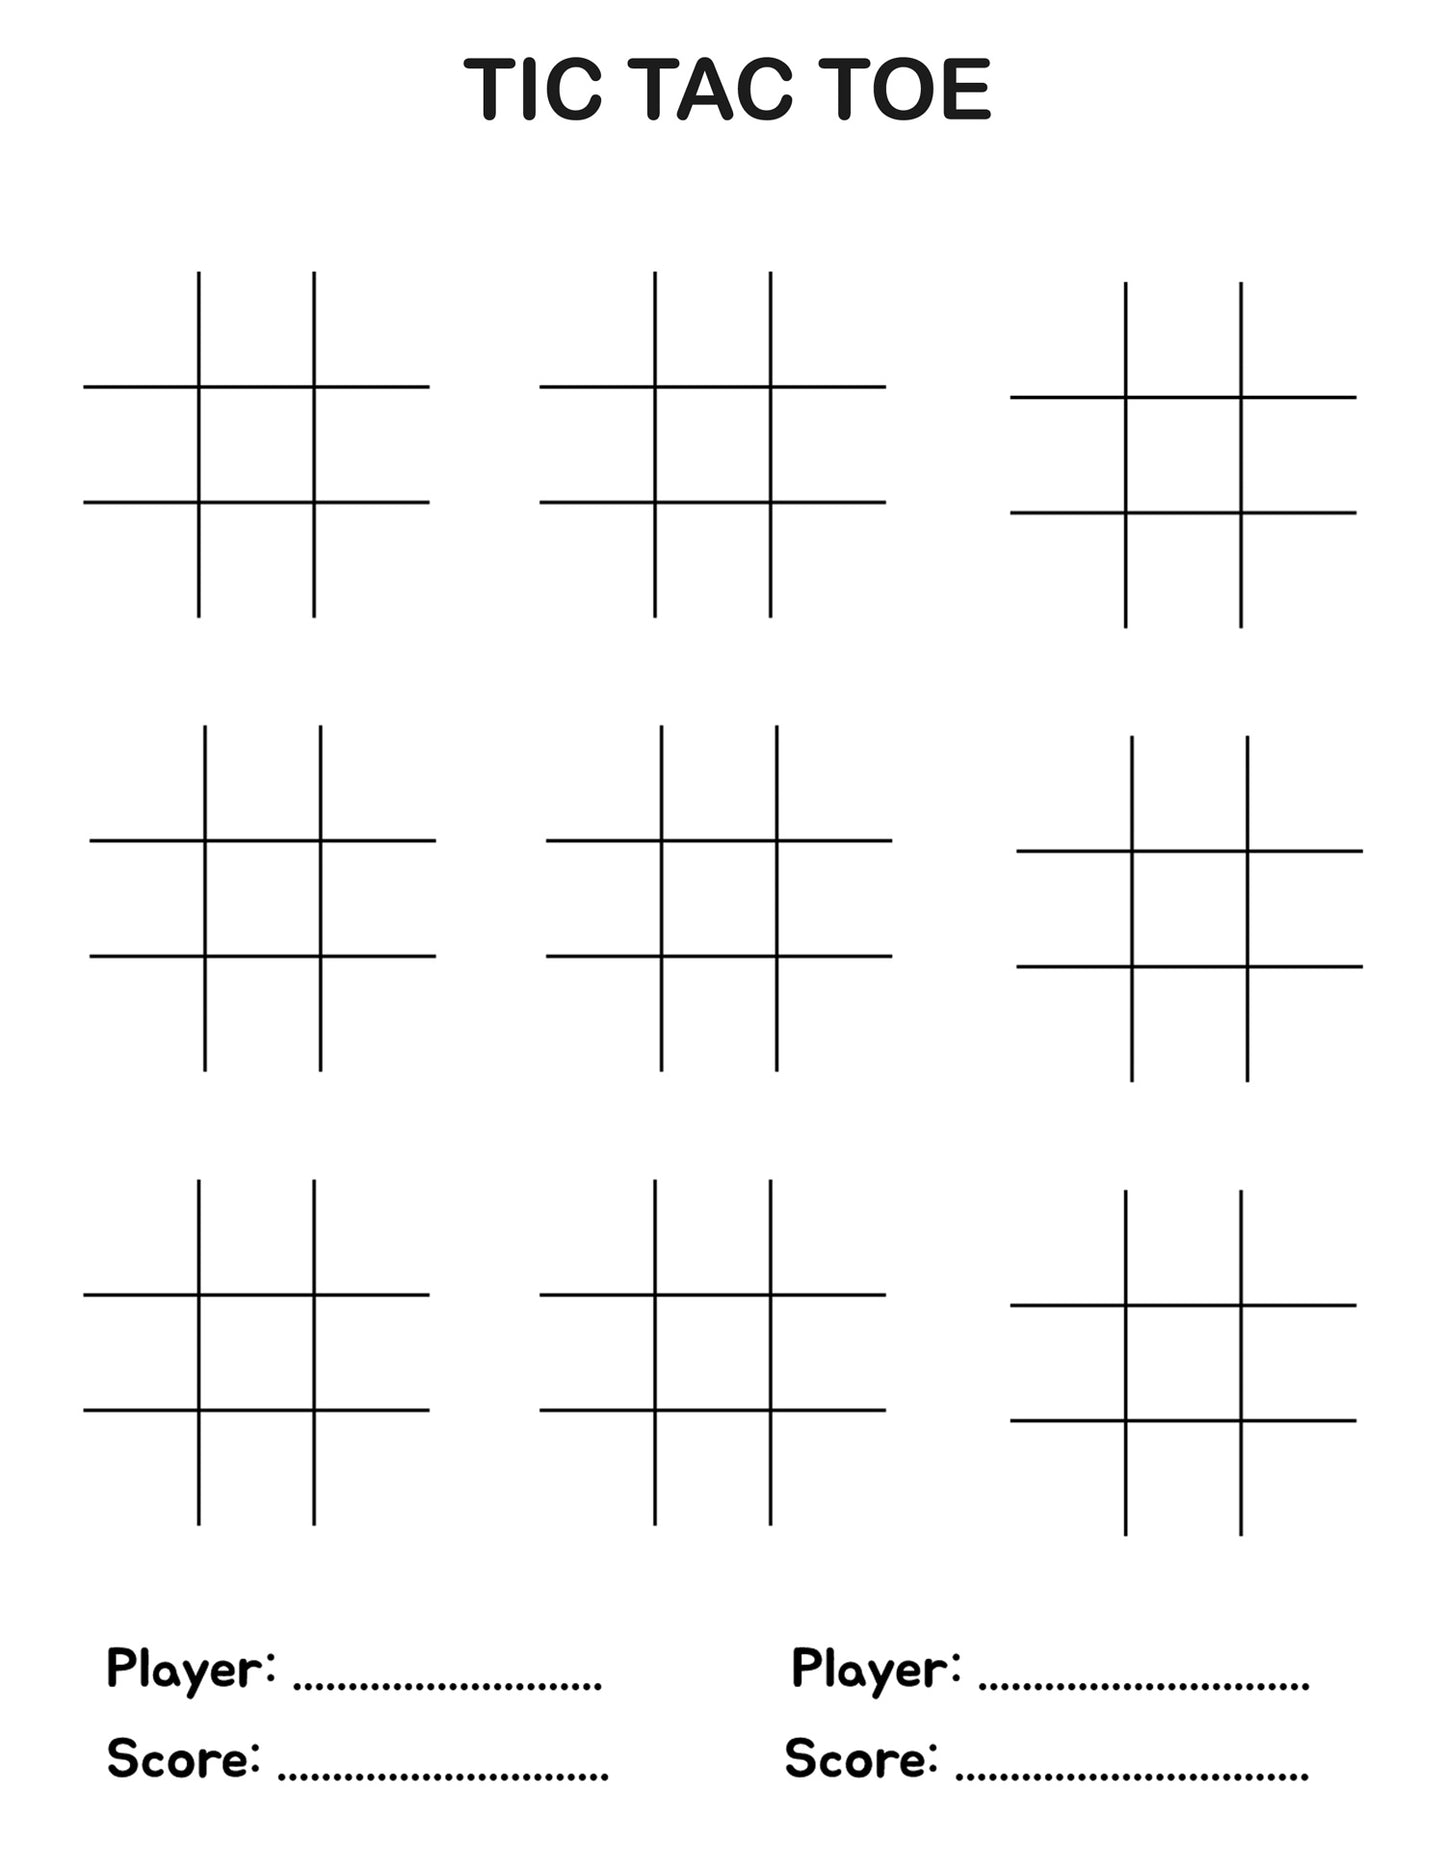 Printable Pen and Paper Games, Travel or Party Games, Battle Ships, Hangman, Tic Tac Toe, Dots and Boxes, 4 Pages PDF, Instant Download